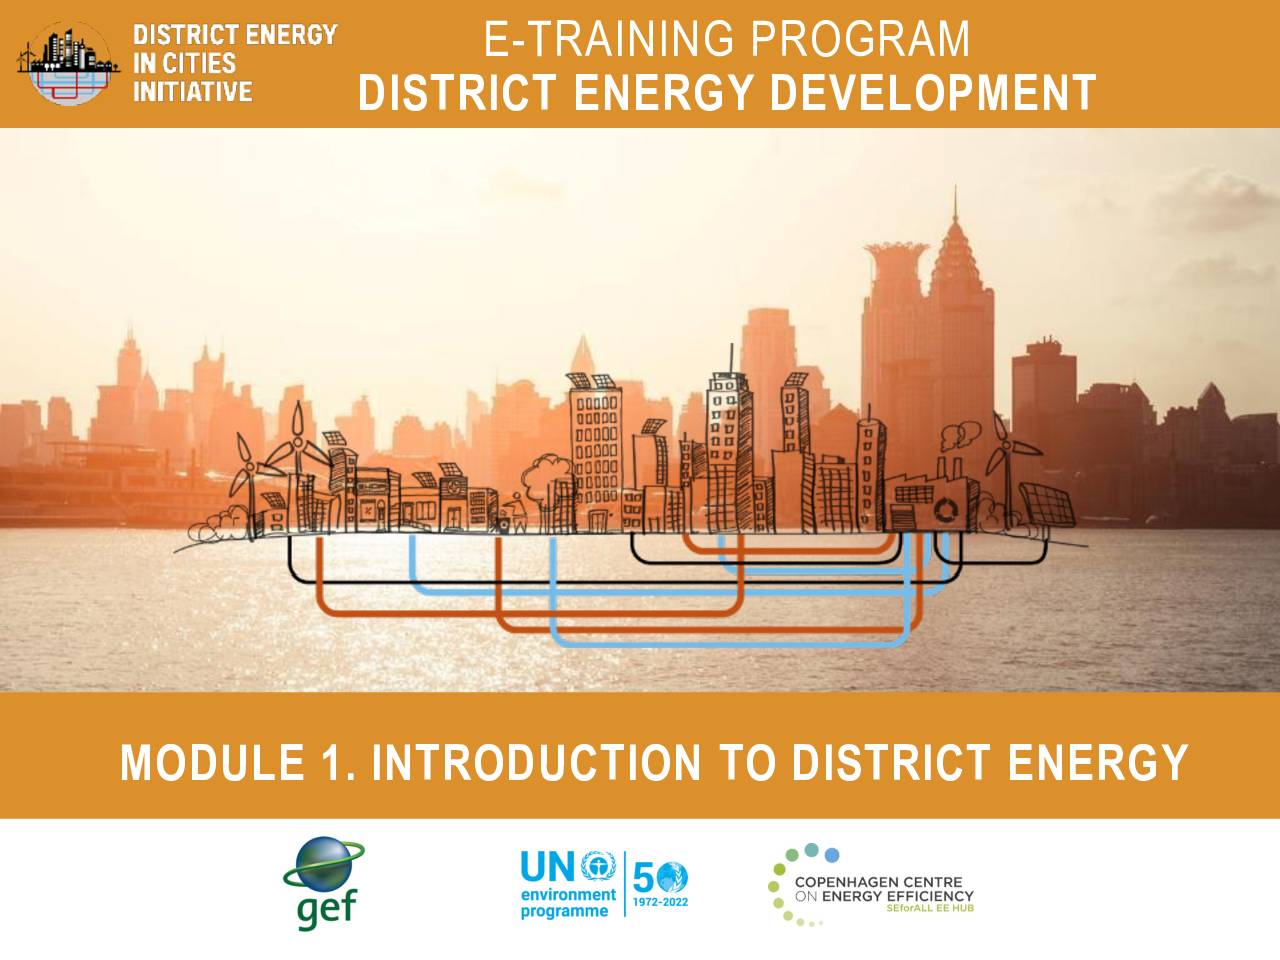 Module 1 – Introduction to District Energy